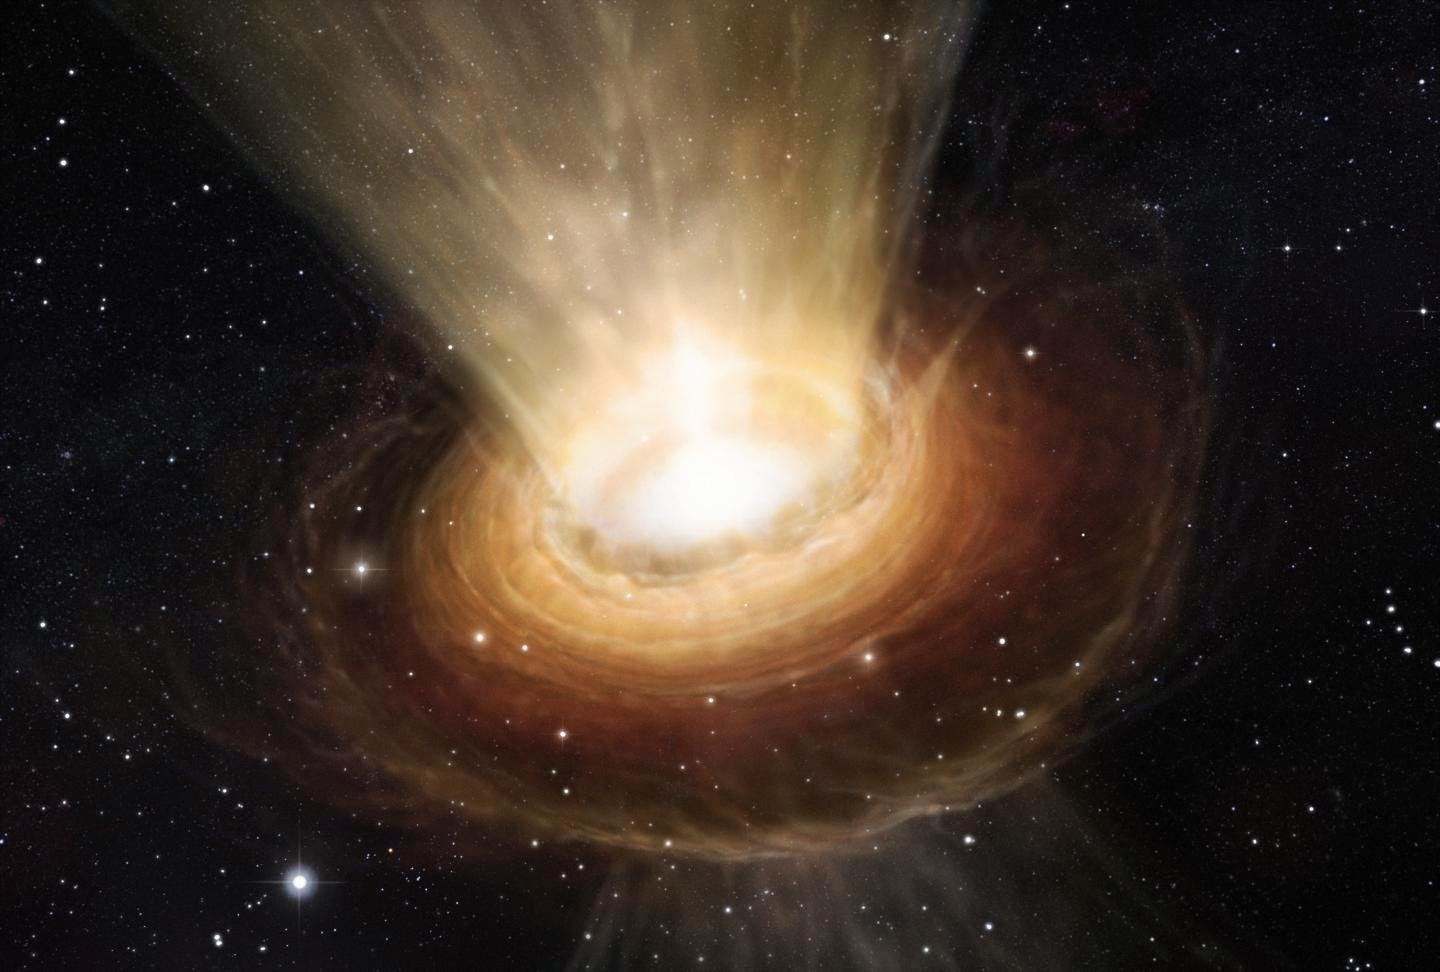 Information is not lost when it enters Black Hole says research